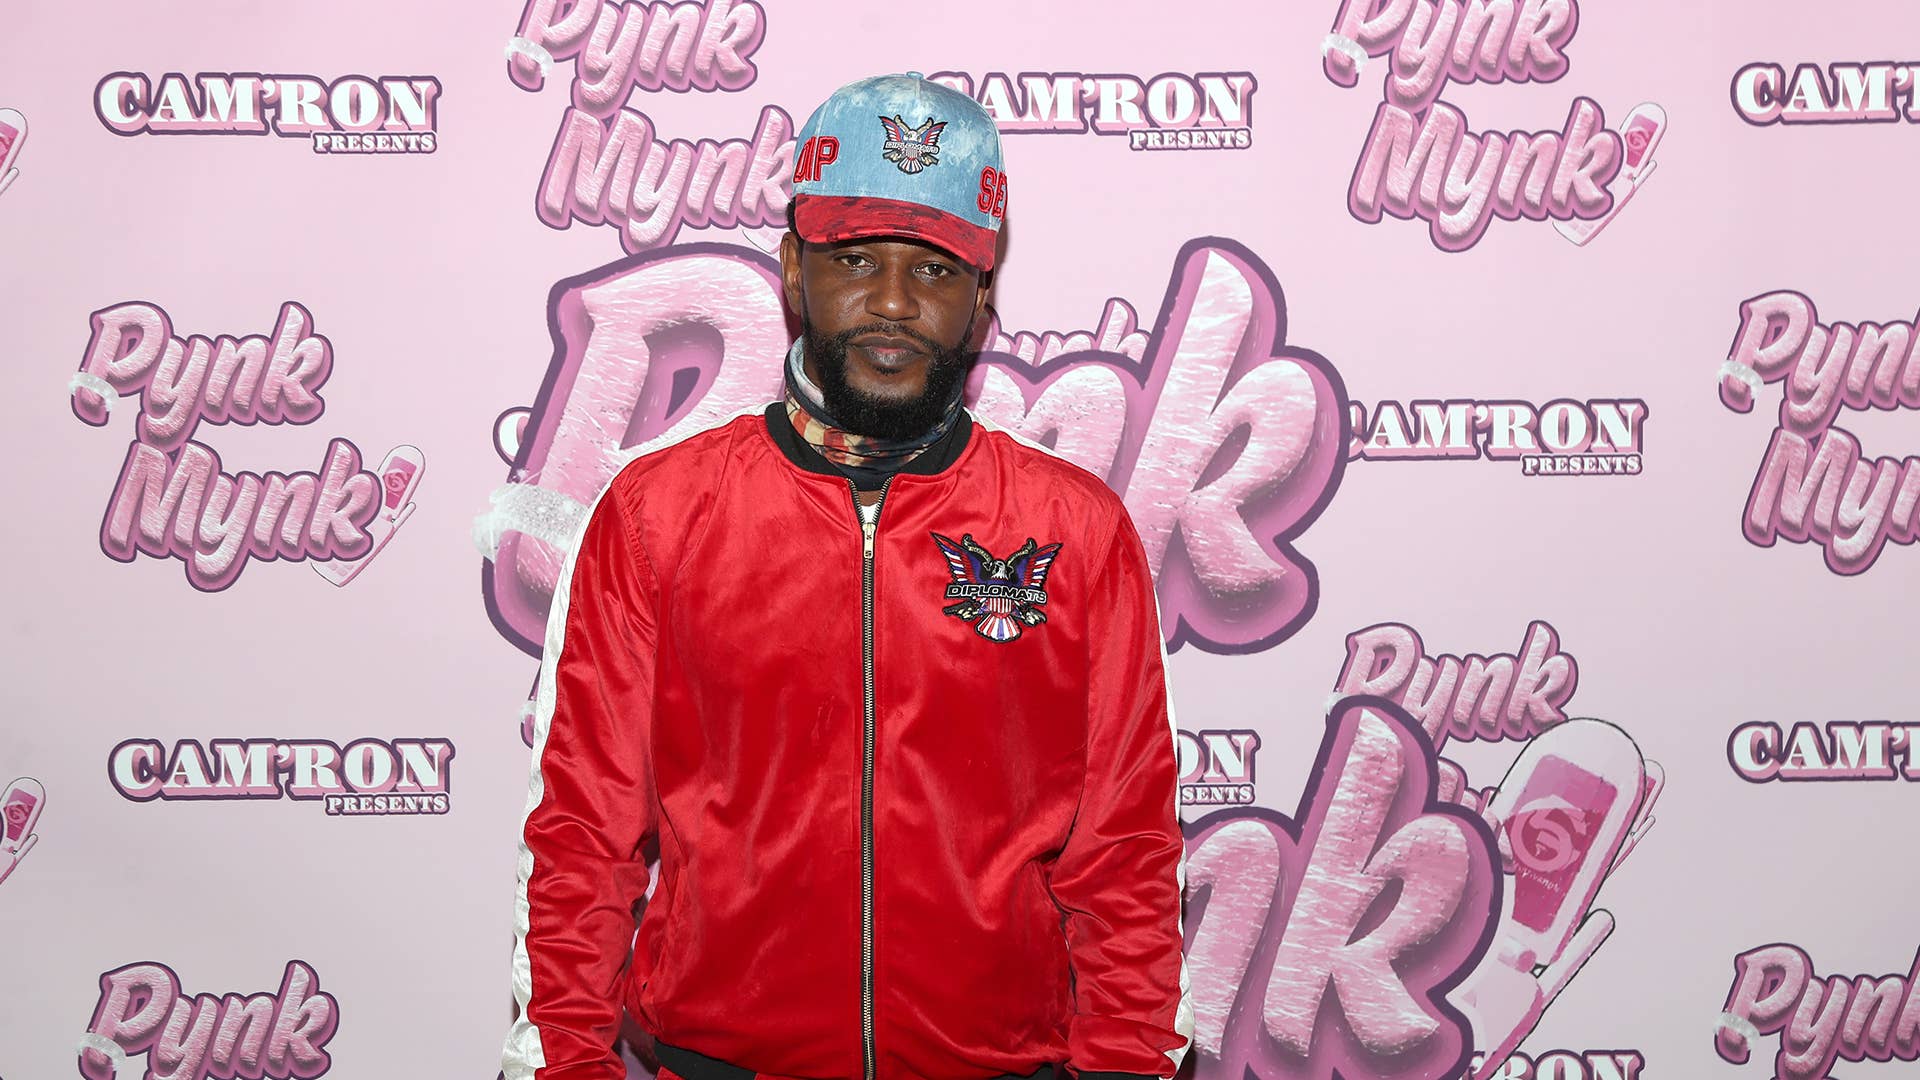 Rapper Cam'ron attends Cam'ron's Pynk Mynk Unveiling at Strains on October 21, 2020 in Perris, California